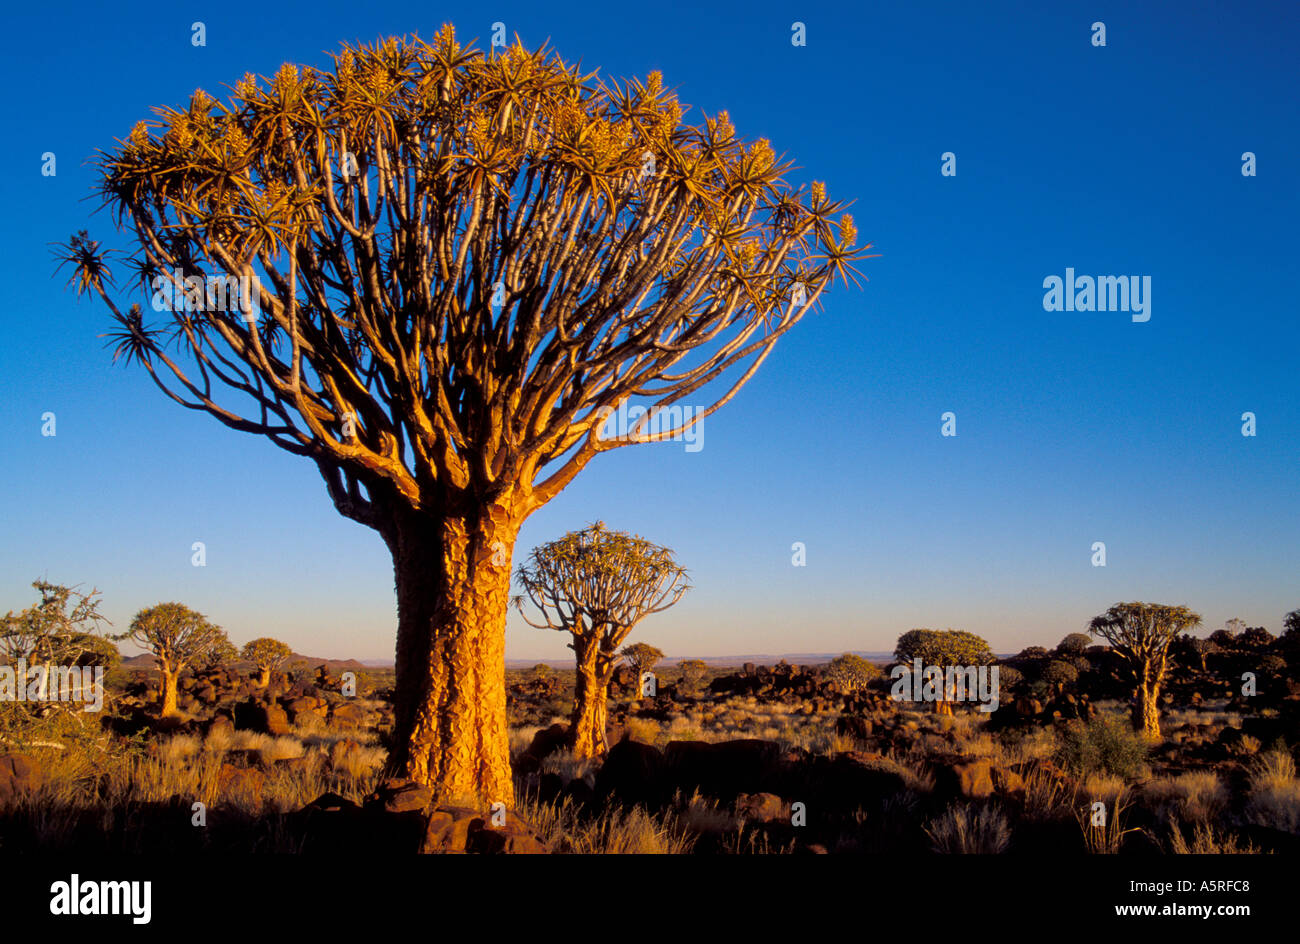 Quiver trees Namibia Africa Stock Photo